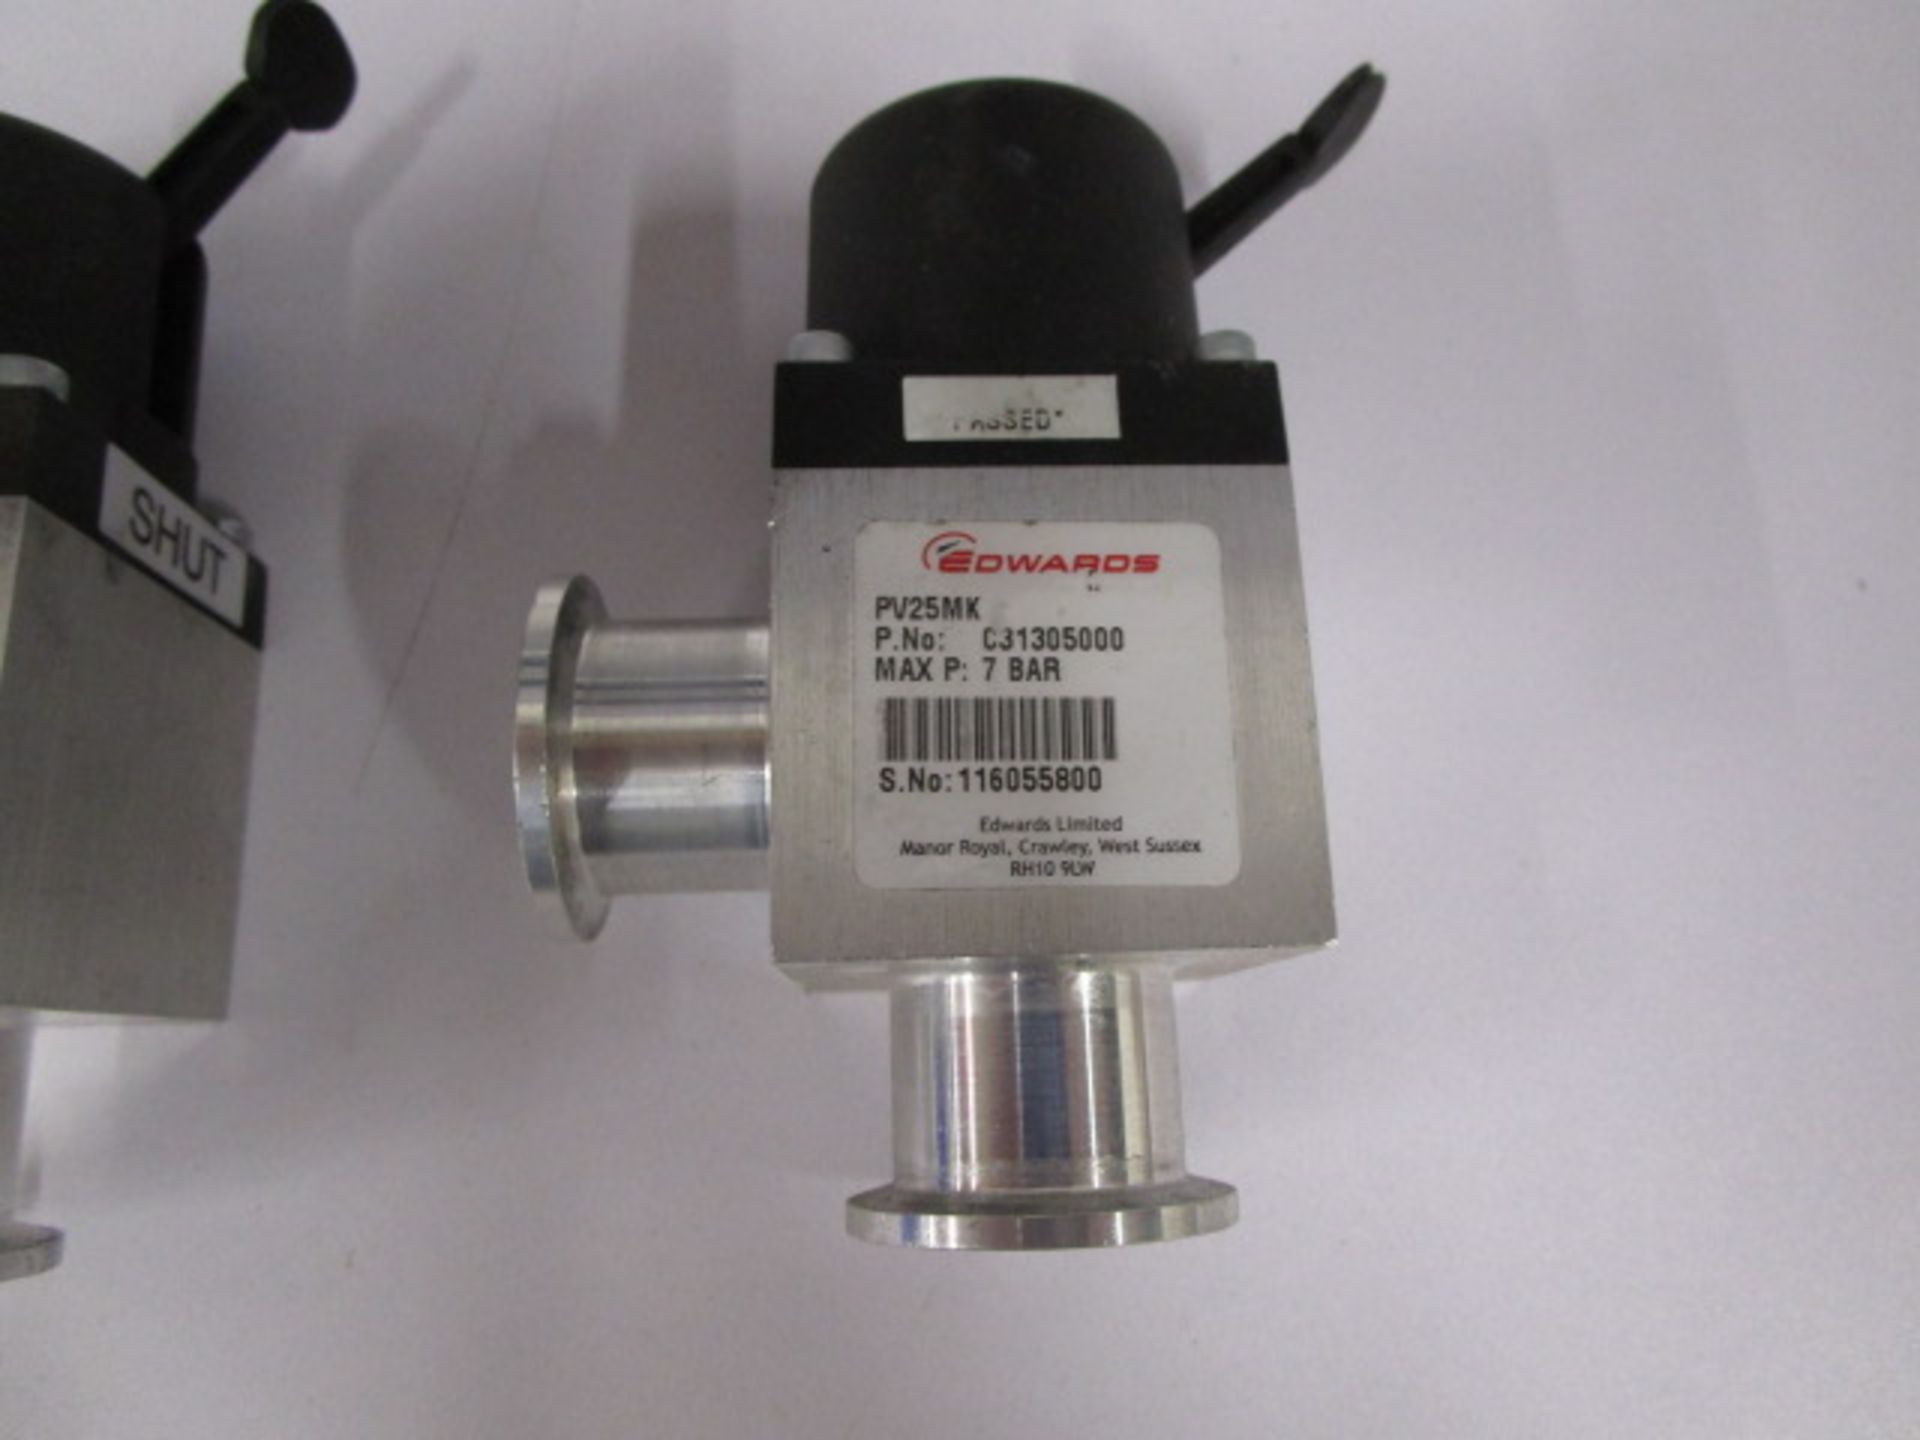 QUANTITY OF 2 EDWARDS PV25MK RIGHT ANGLE PIPELINE ISOLATION VALVE - Image 3 of 5